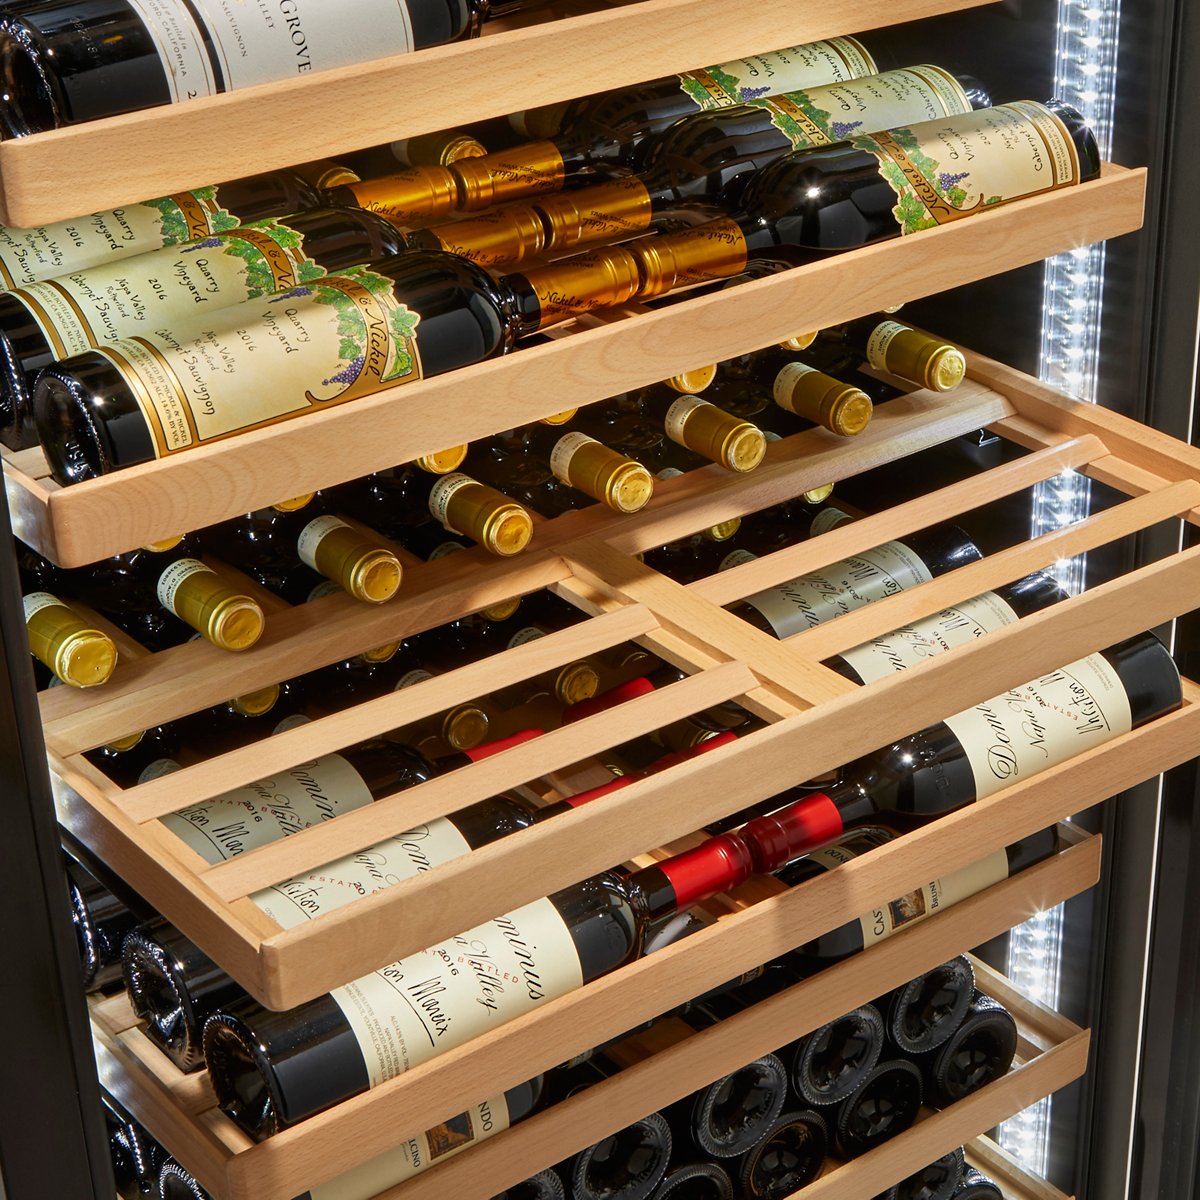 Classic XL 600-Bottle Wine Cellar with VinoView Shelving